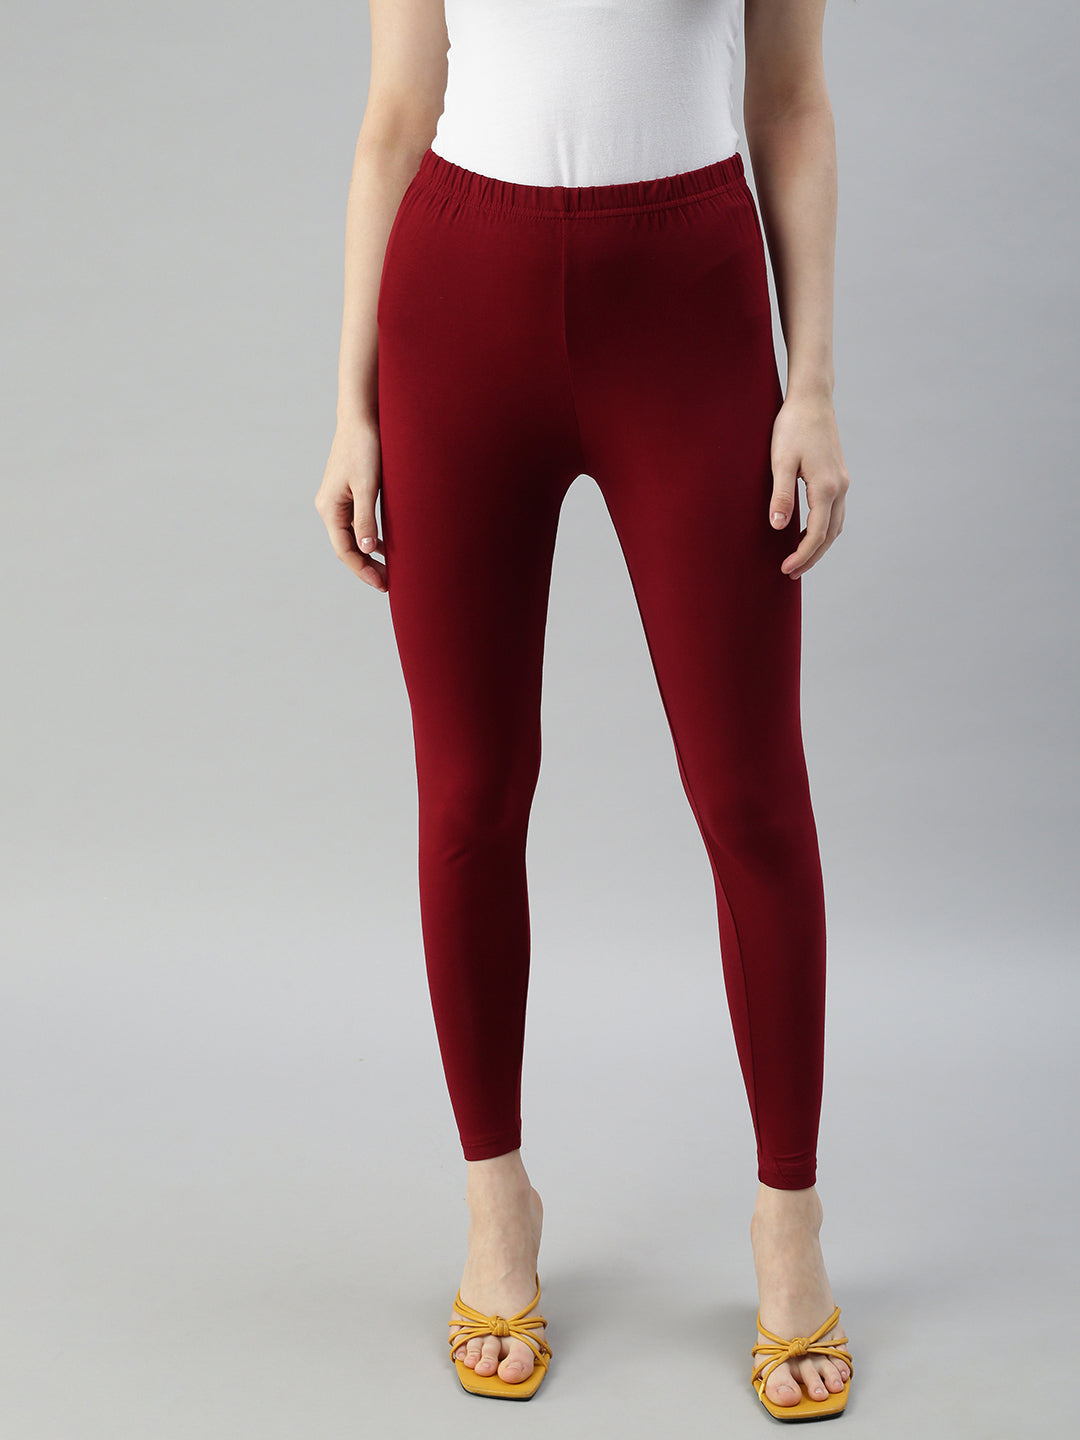 Prisma Shimmer Leggings in Apricot for a Chic Look